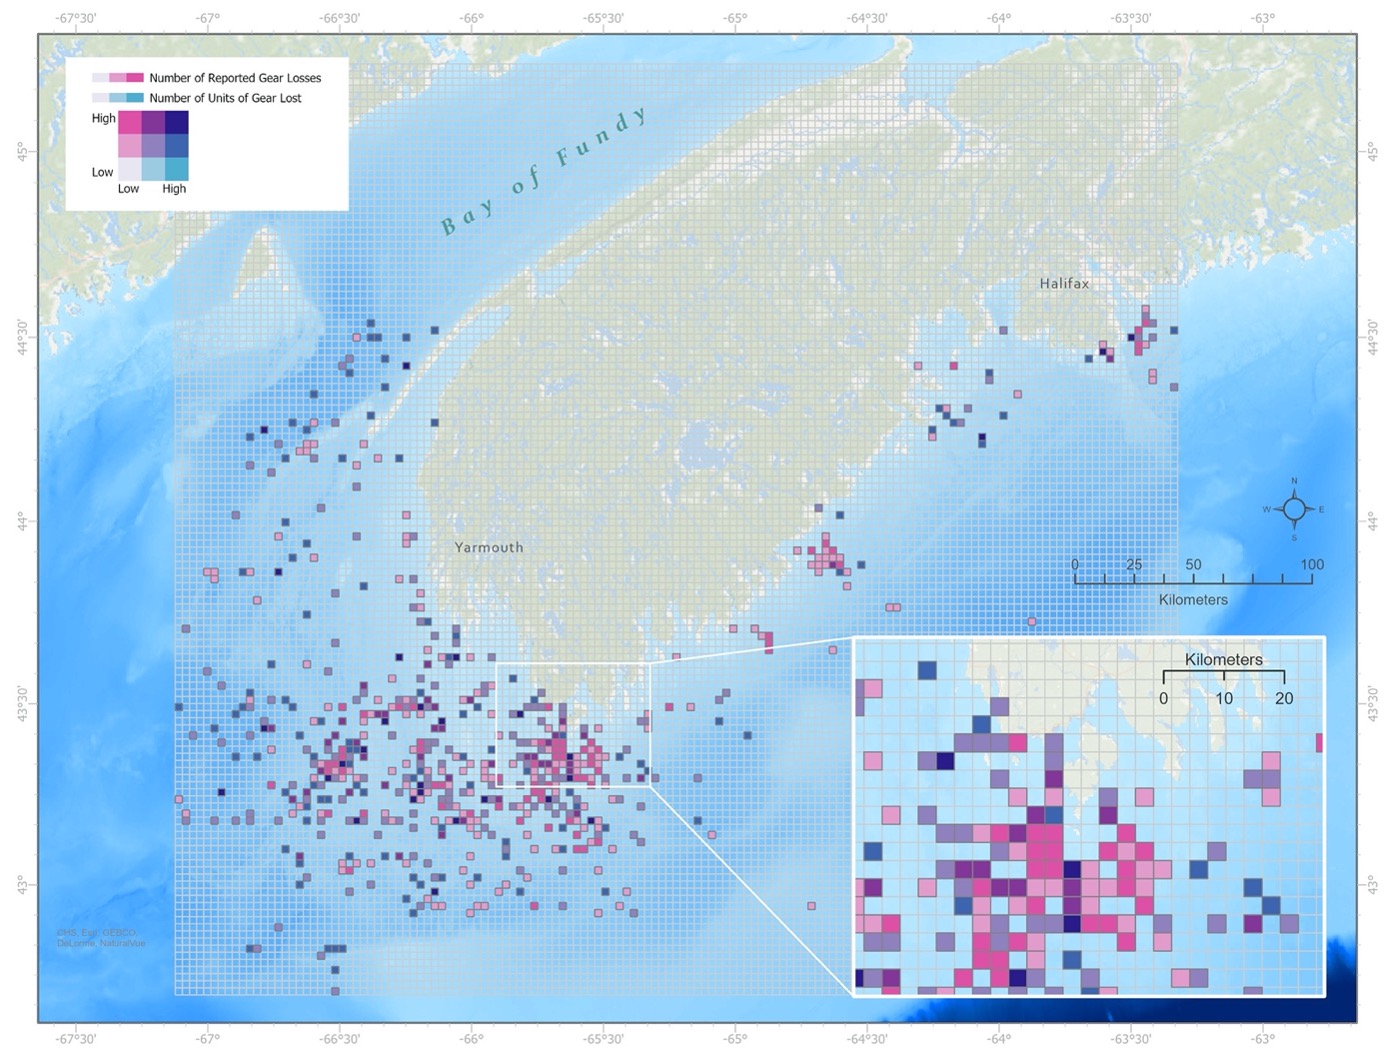 A map showing a grid covering the ocean surrounding Nova Scotia, with cells coloured to reveal areas with high reports of lost gear, and/or existing gear.